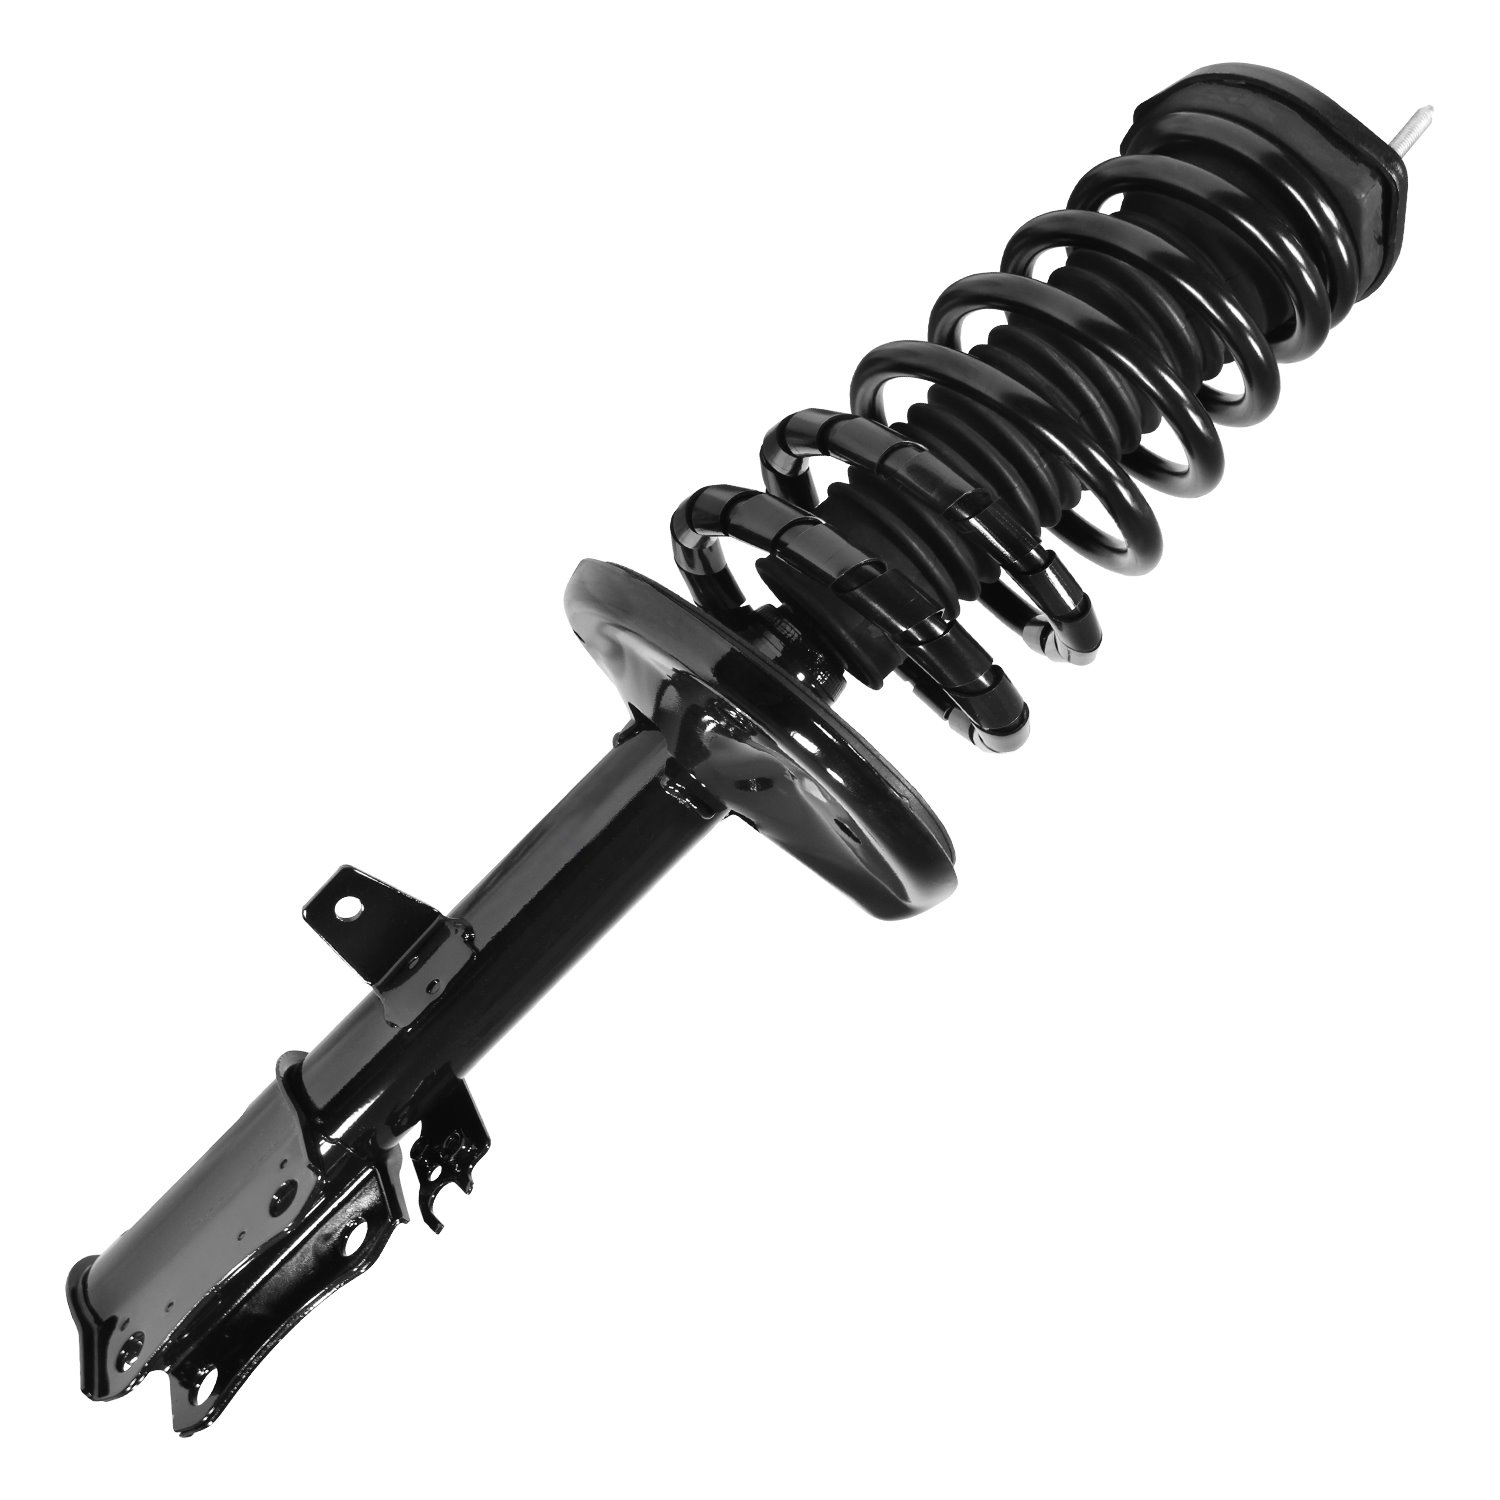 15032 Suspension Strut & Coil Spring Assembly Fits Select Toyota Camry, Toyota Solara